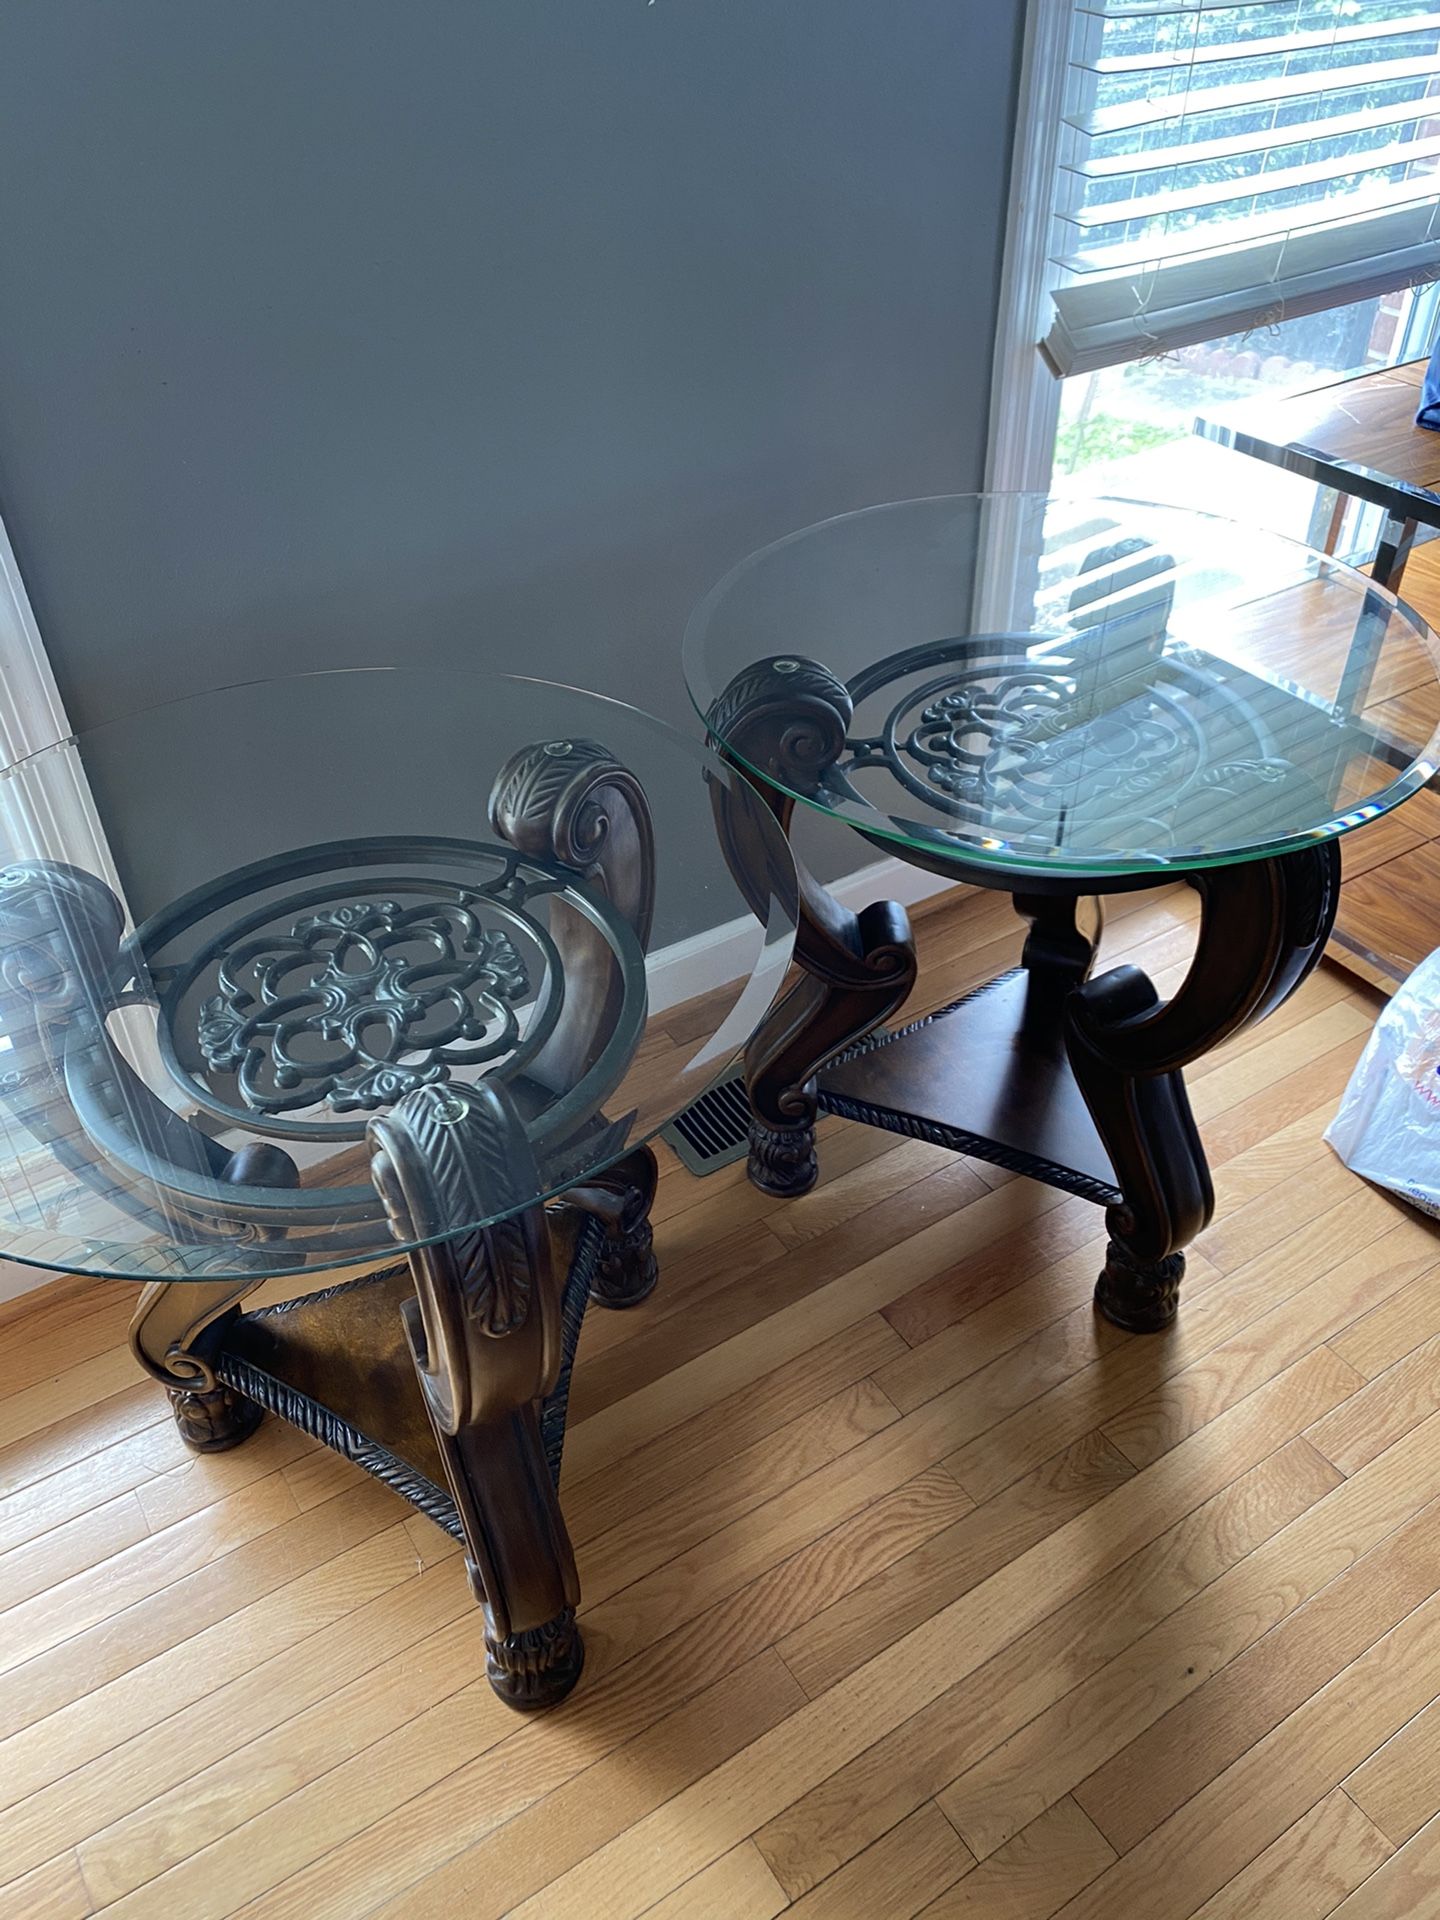 End tables - MOVING SALE! $60 IF PICKED UP TODAY!